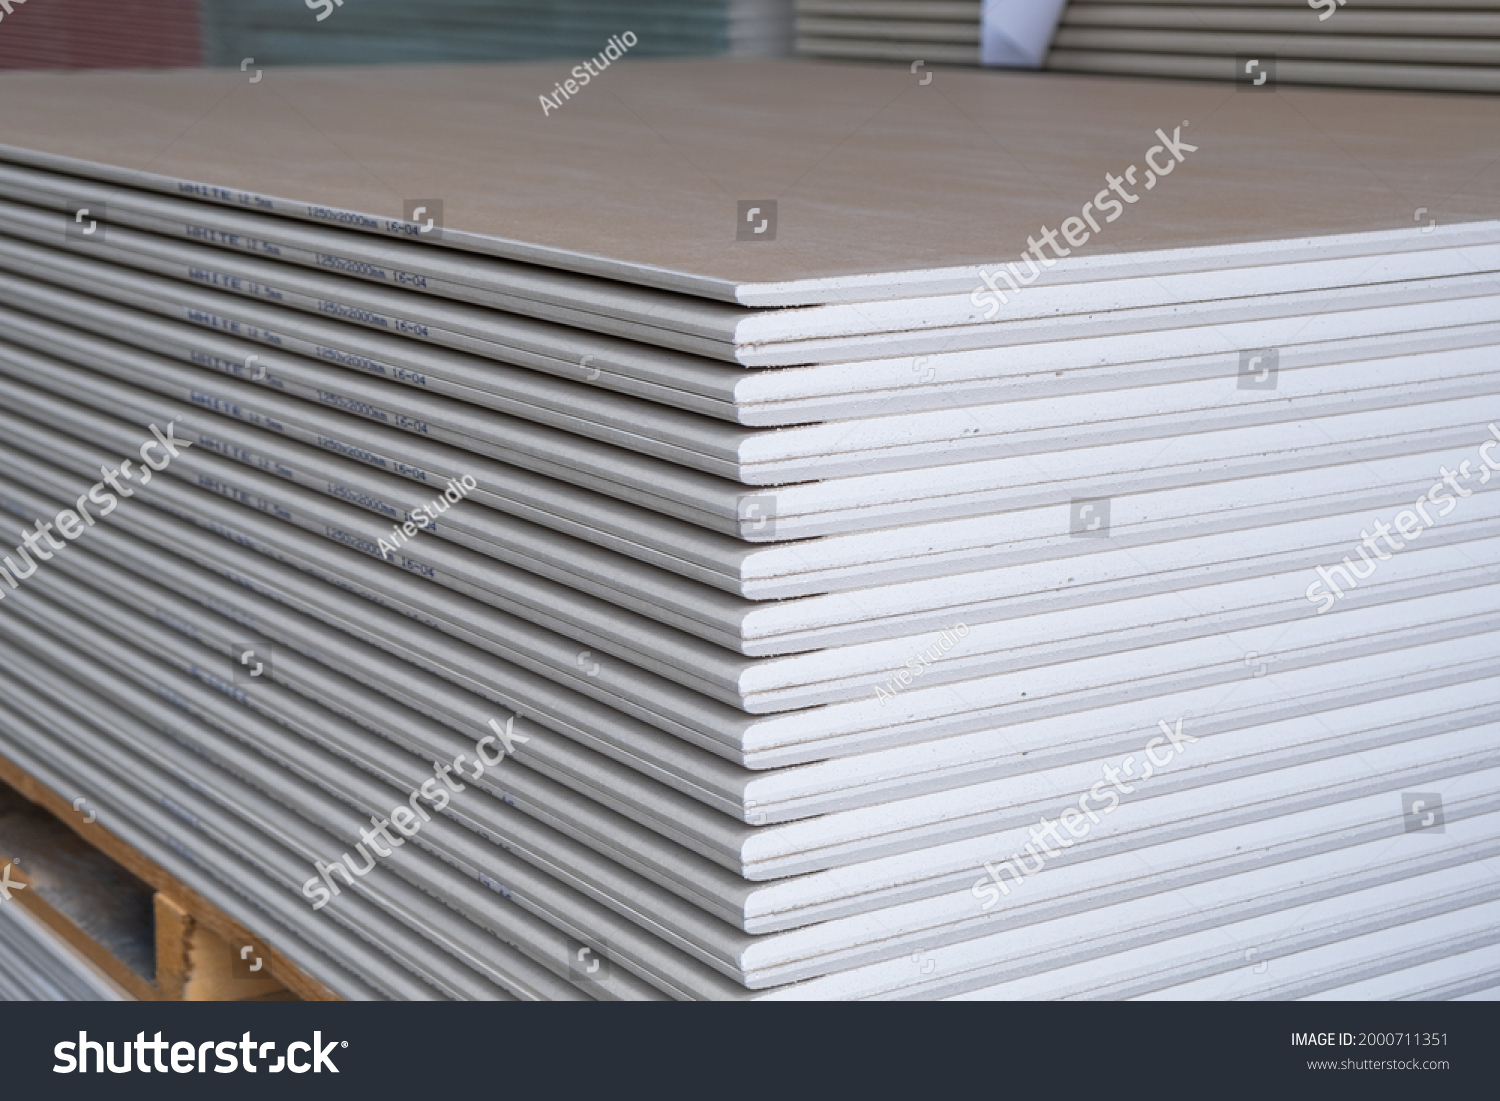 The stack of WHITE Standard Gypsum board panel. Plasterboard. Panel Type A designed for indoor walls, partitions and ceilings, construction site #2000711351